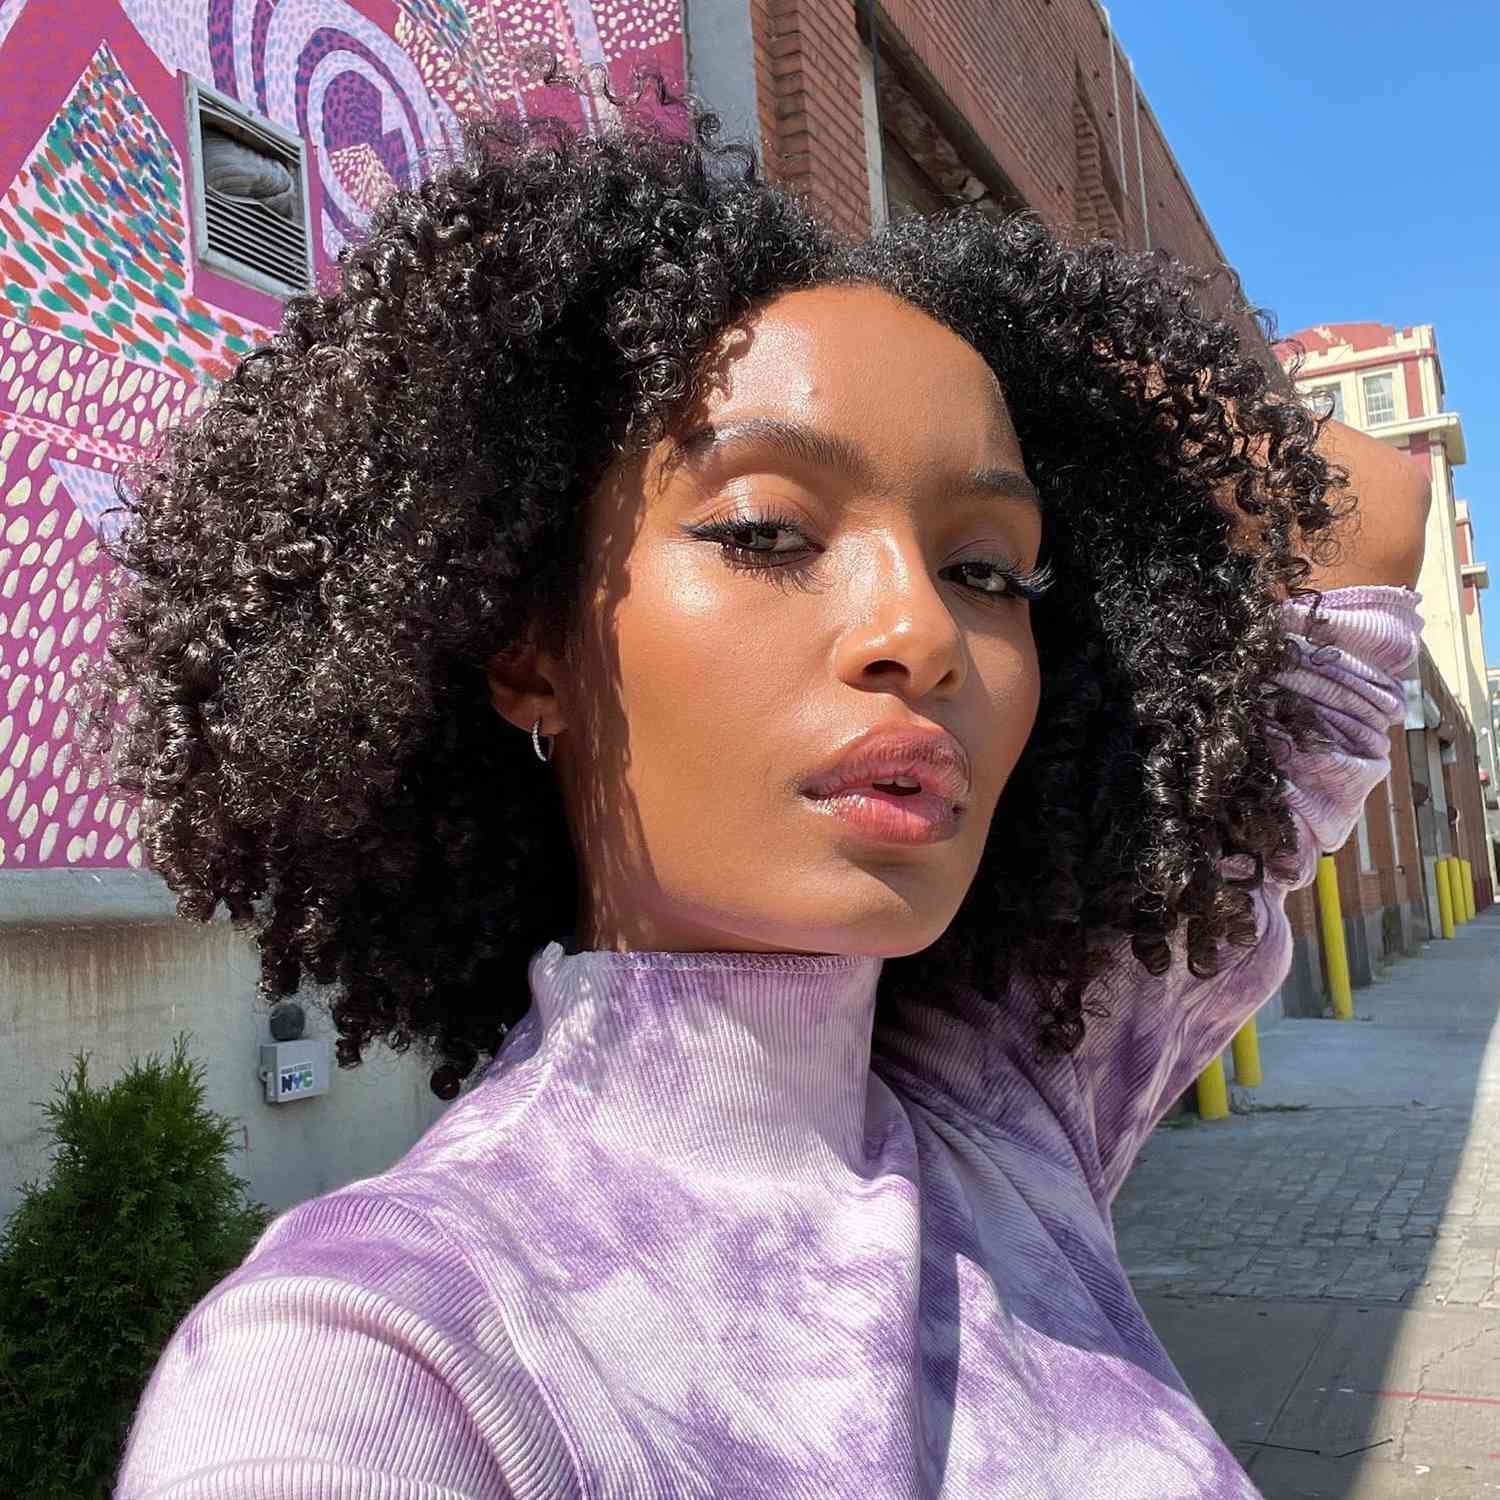 Yara Shahidi with a cropped, curly hairstyle, radiant skin, and a purple marbled turtleneck